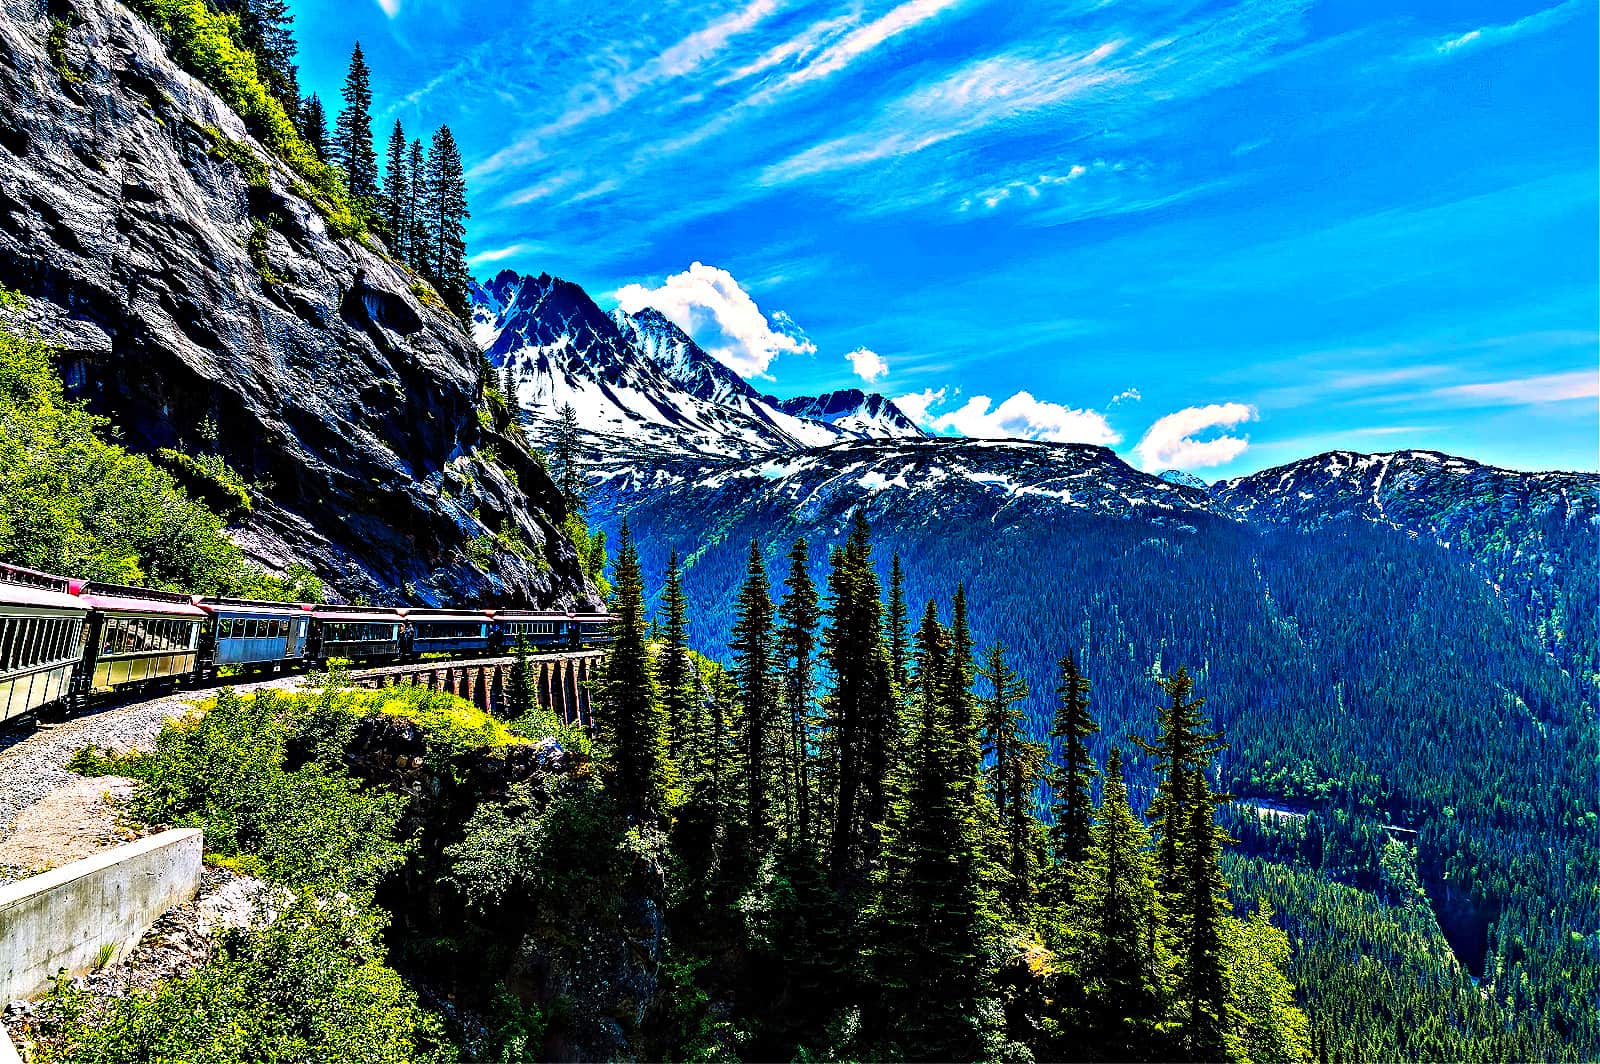 A view looking back from a train on the White Pass and Yukon railway on a bridge near Skagway, Alaska in summertime